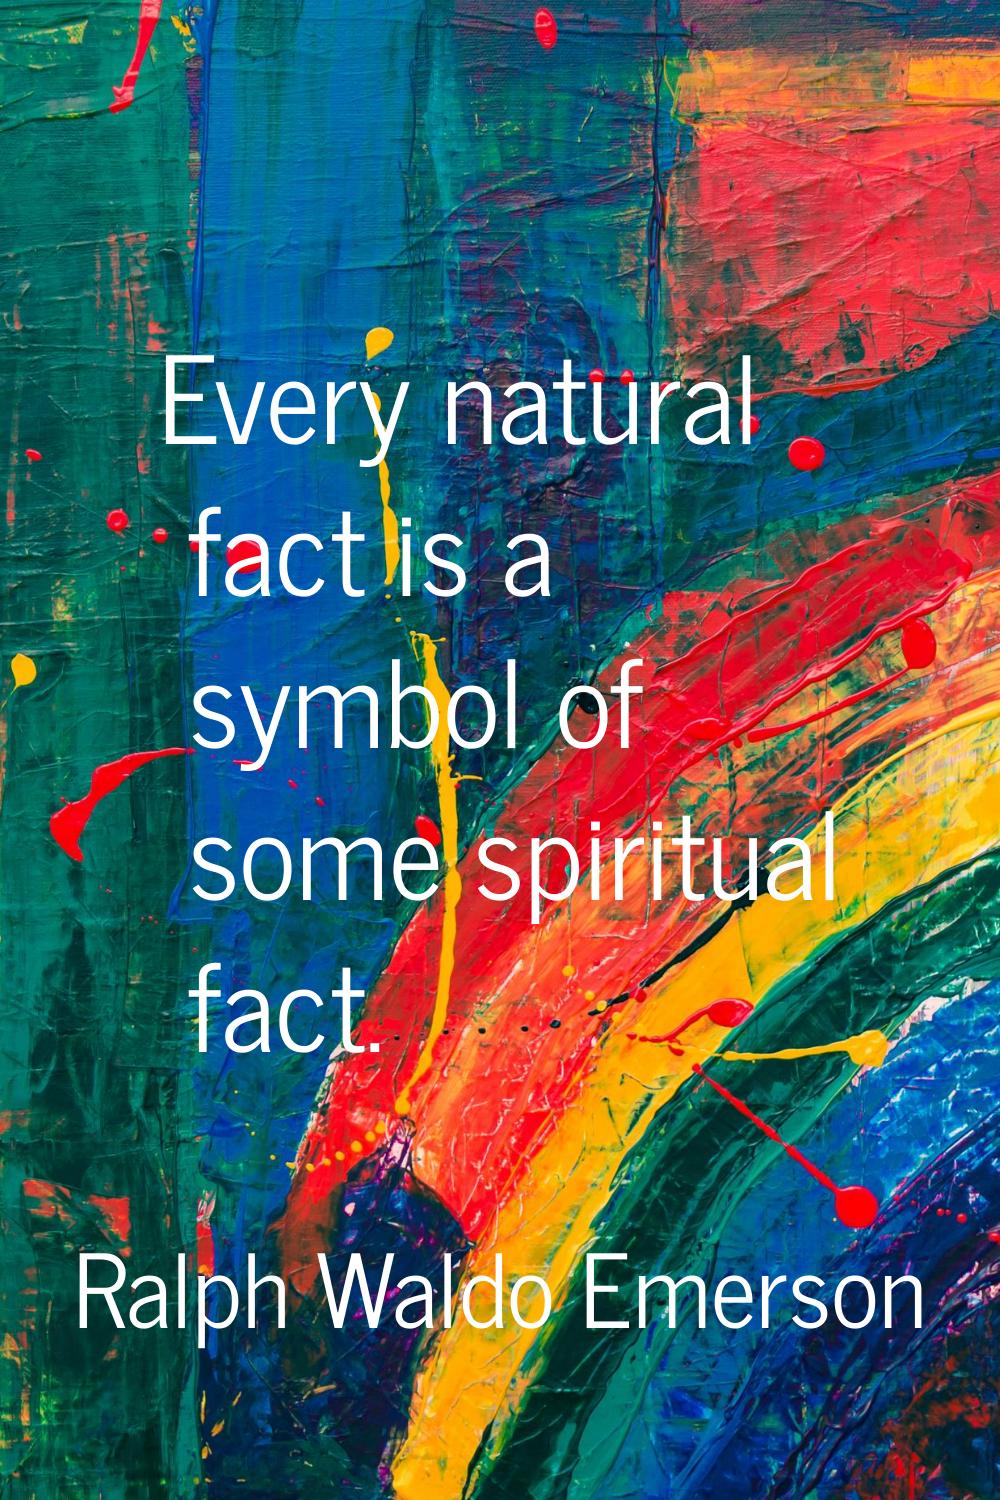 Every natural fact is a symbol of some spiritual fact.